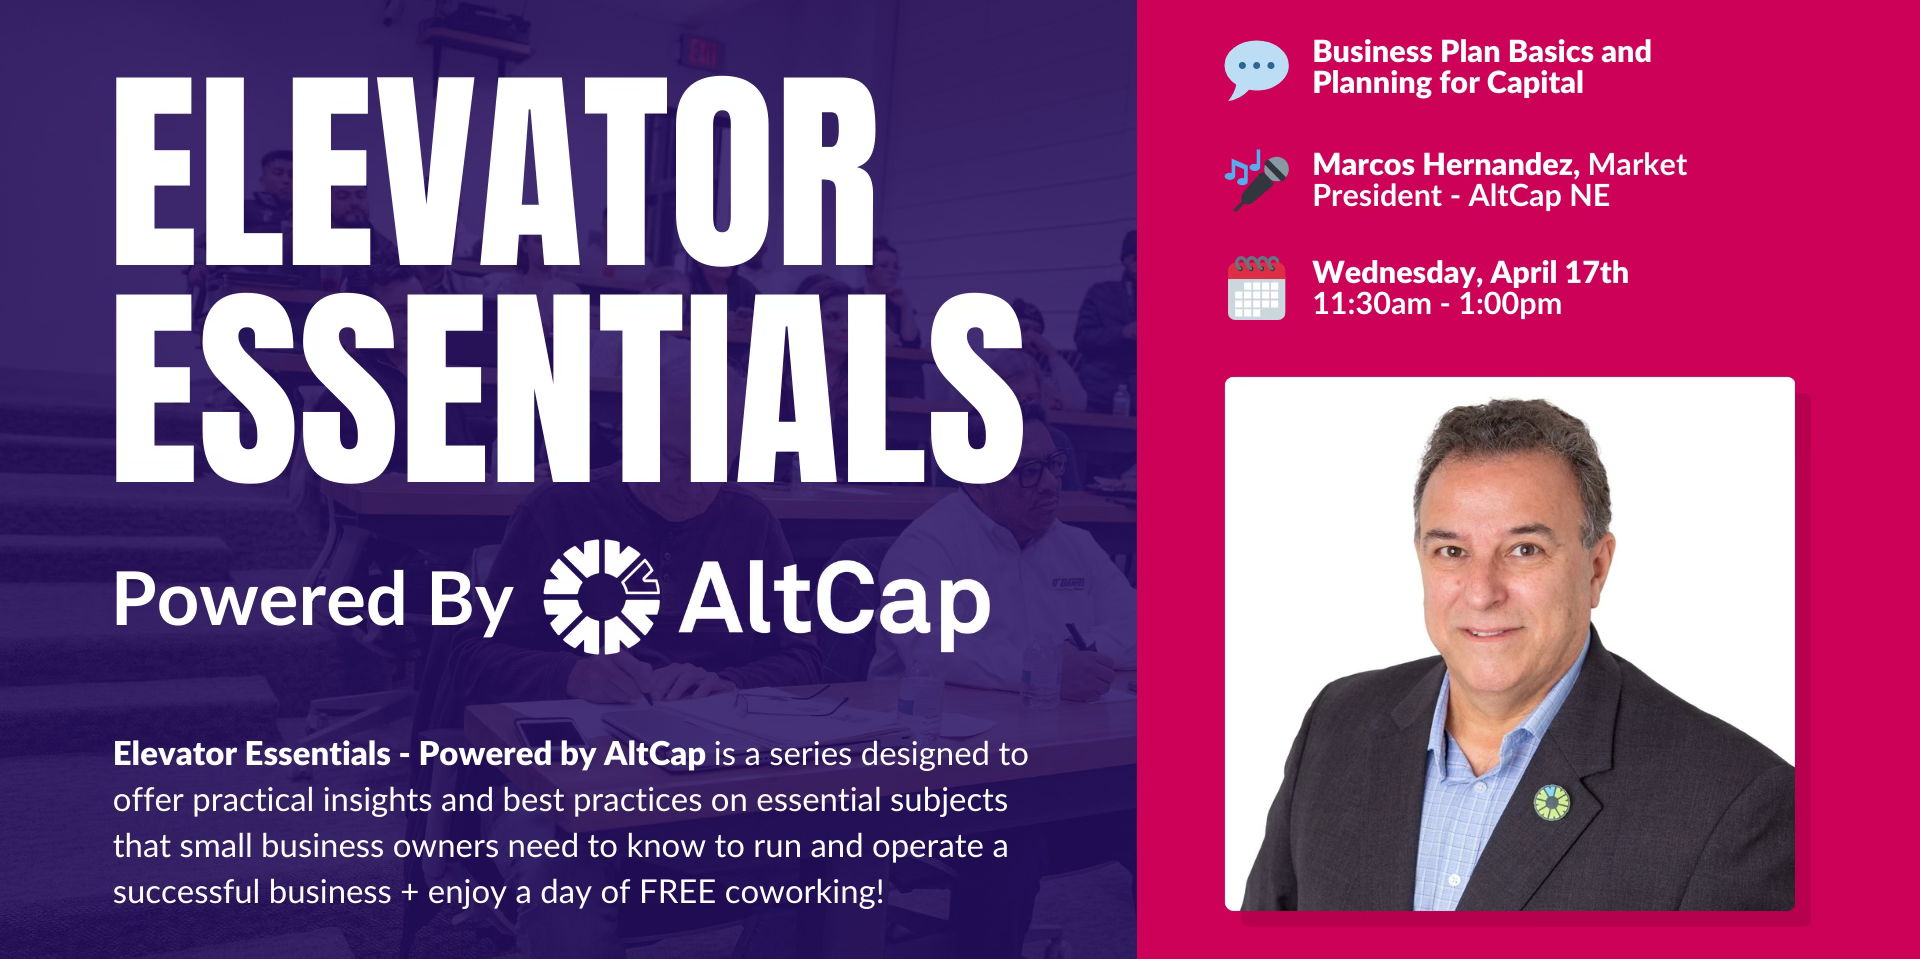 Elevator Essentials | Powered by AltCap: Business Plan Basics and Planning for Capital promotional image